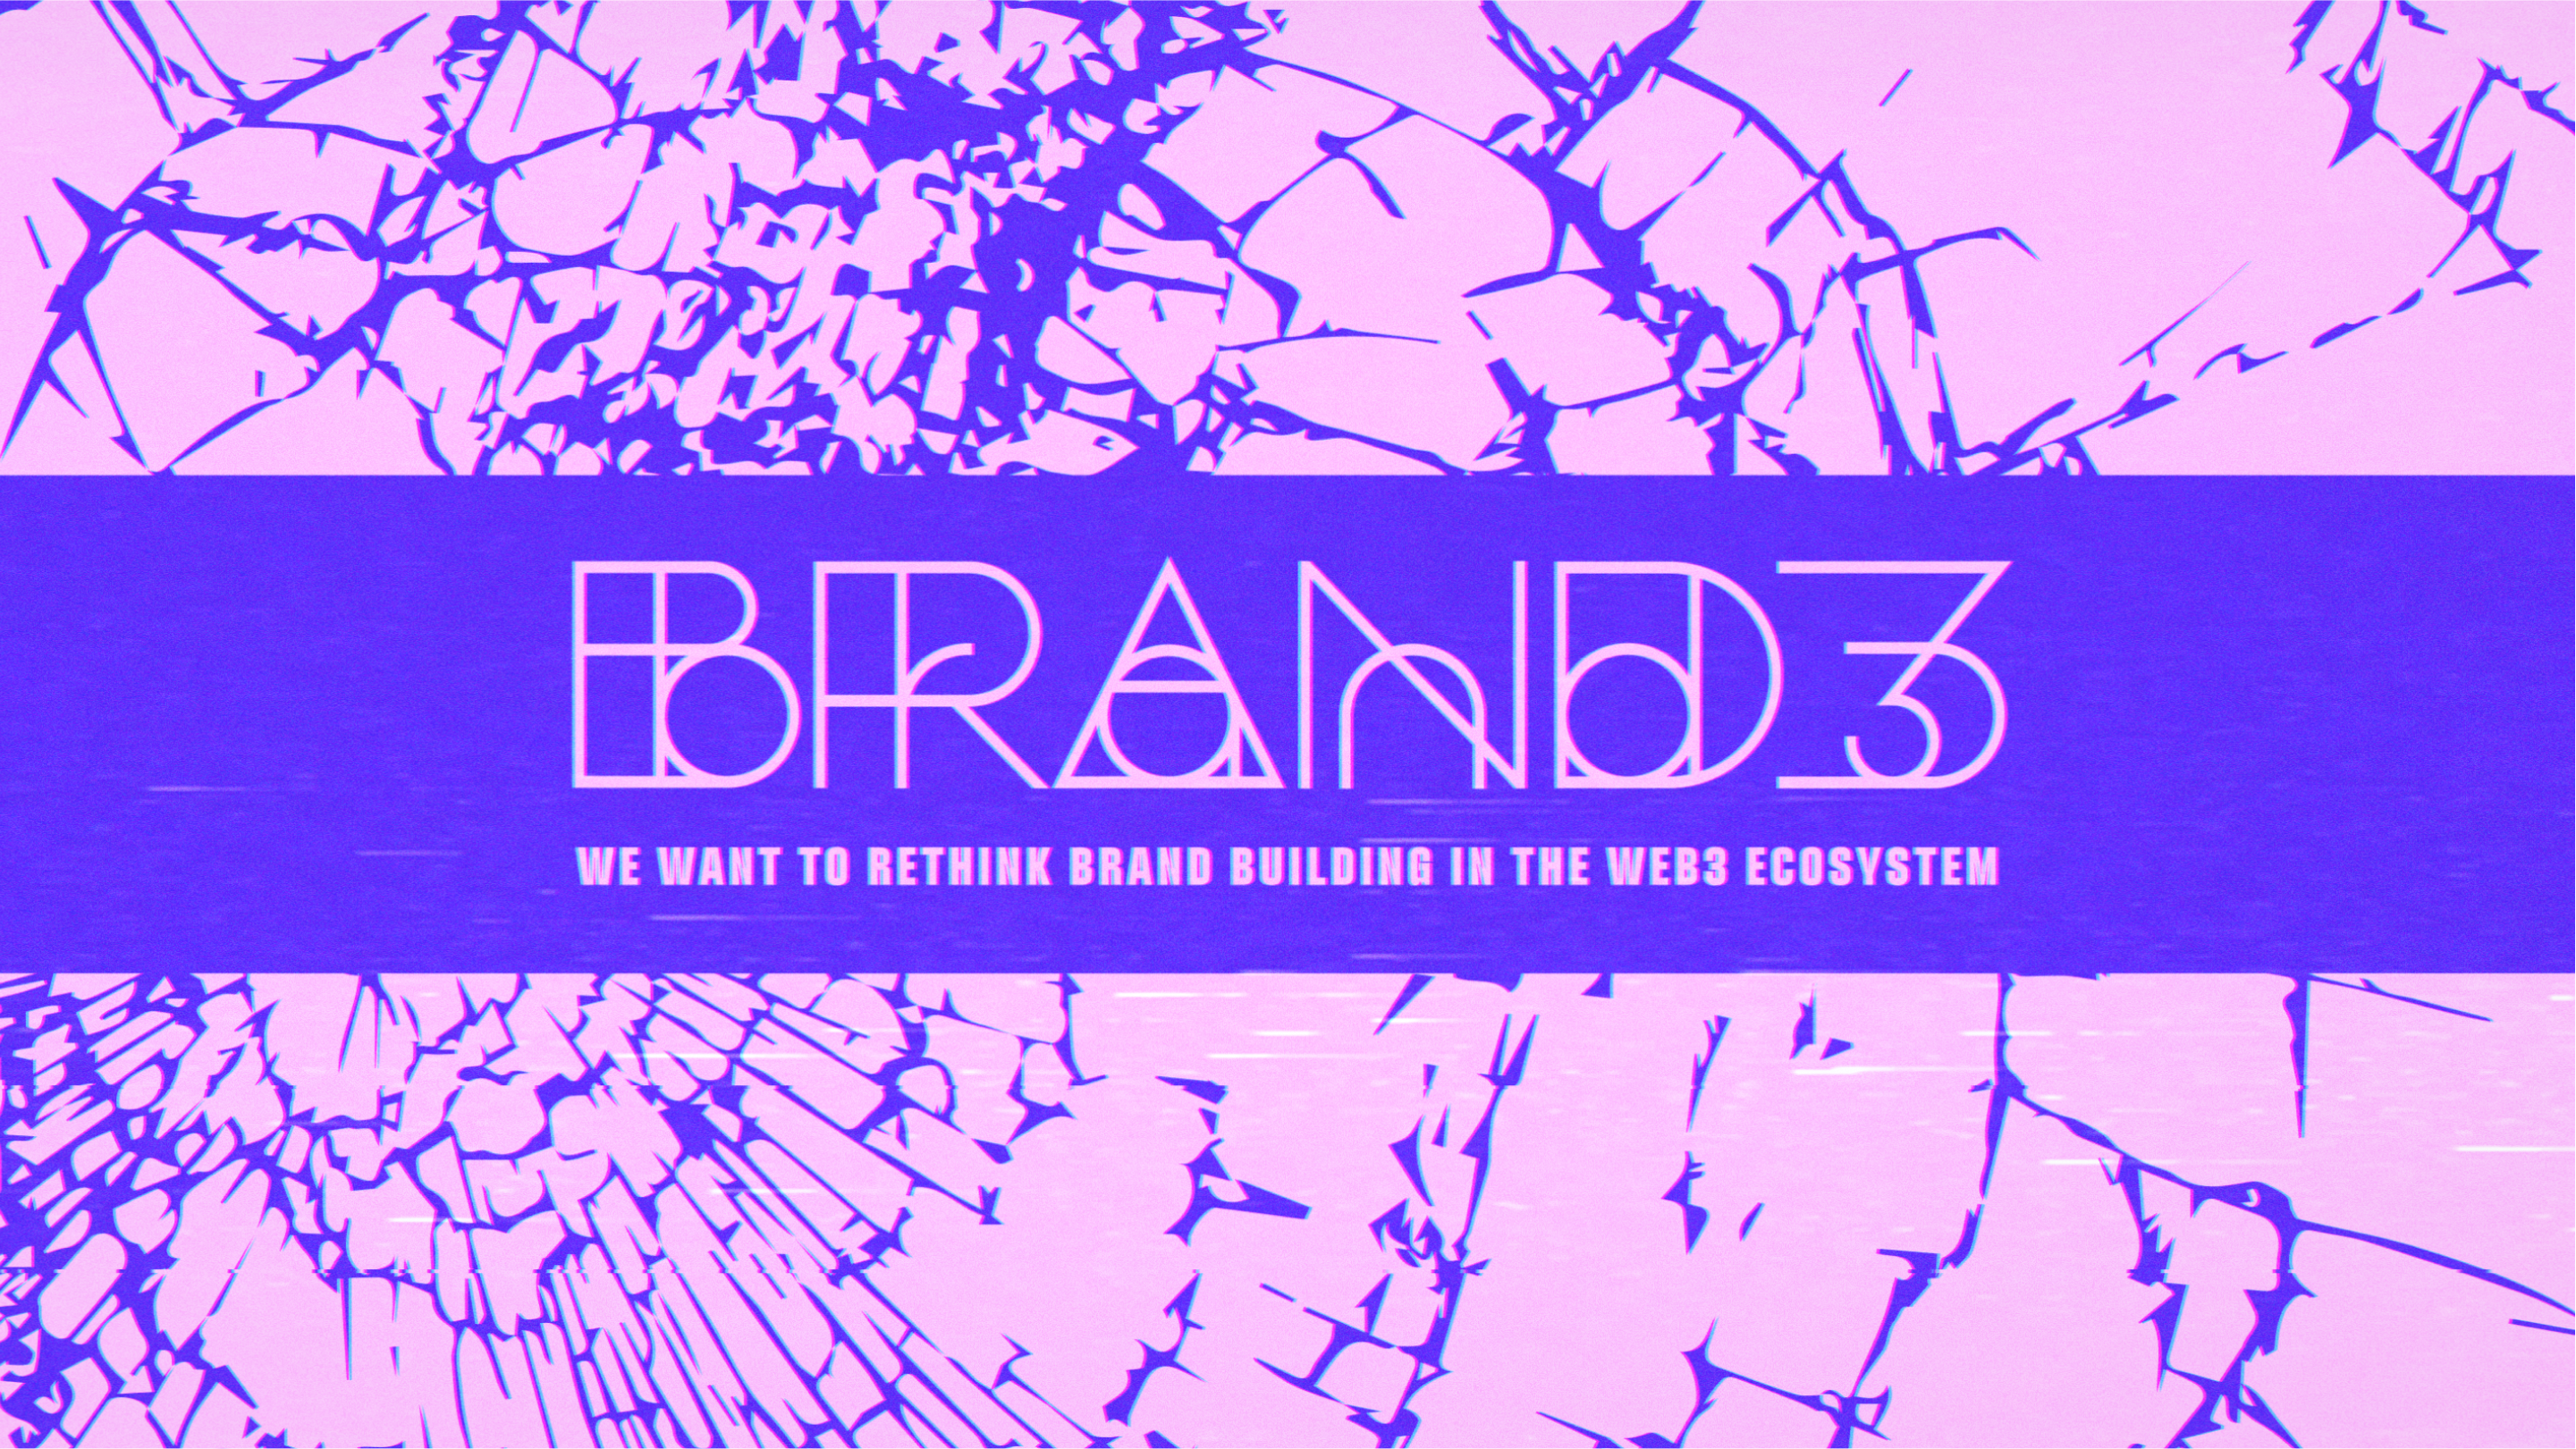 Brand3 is a laboratory to explore the possibilities of Web3 ecosystem brands.